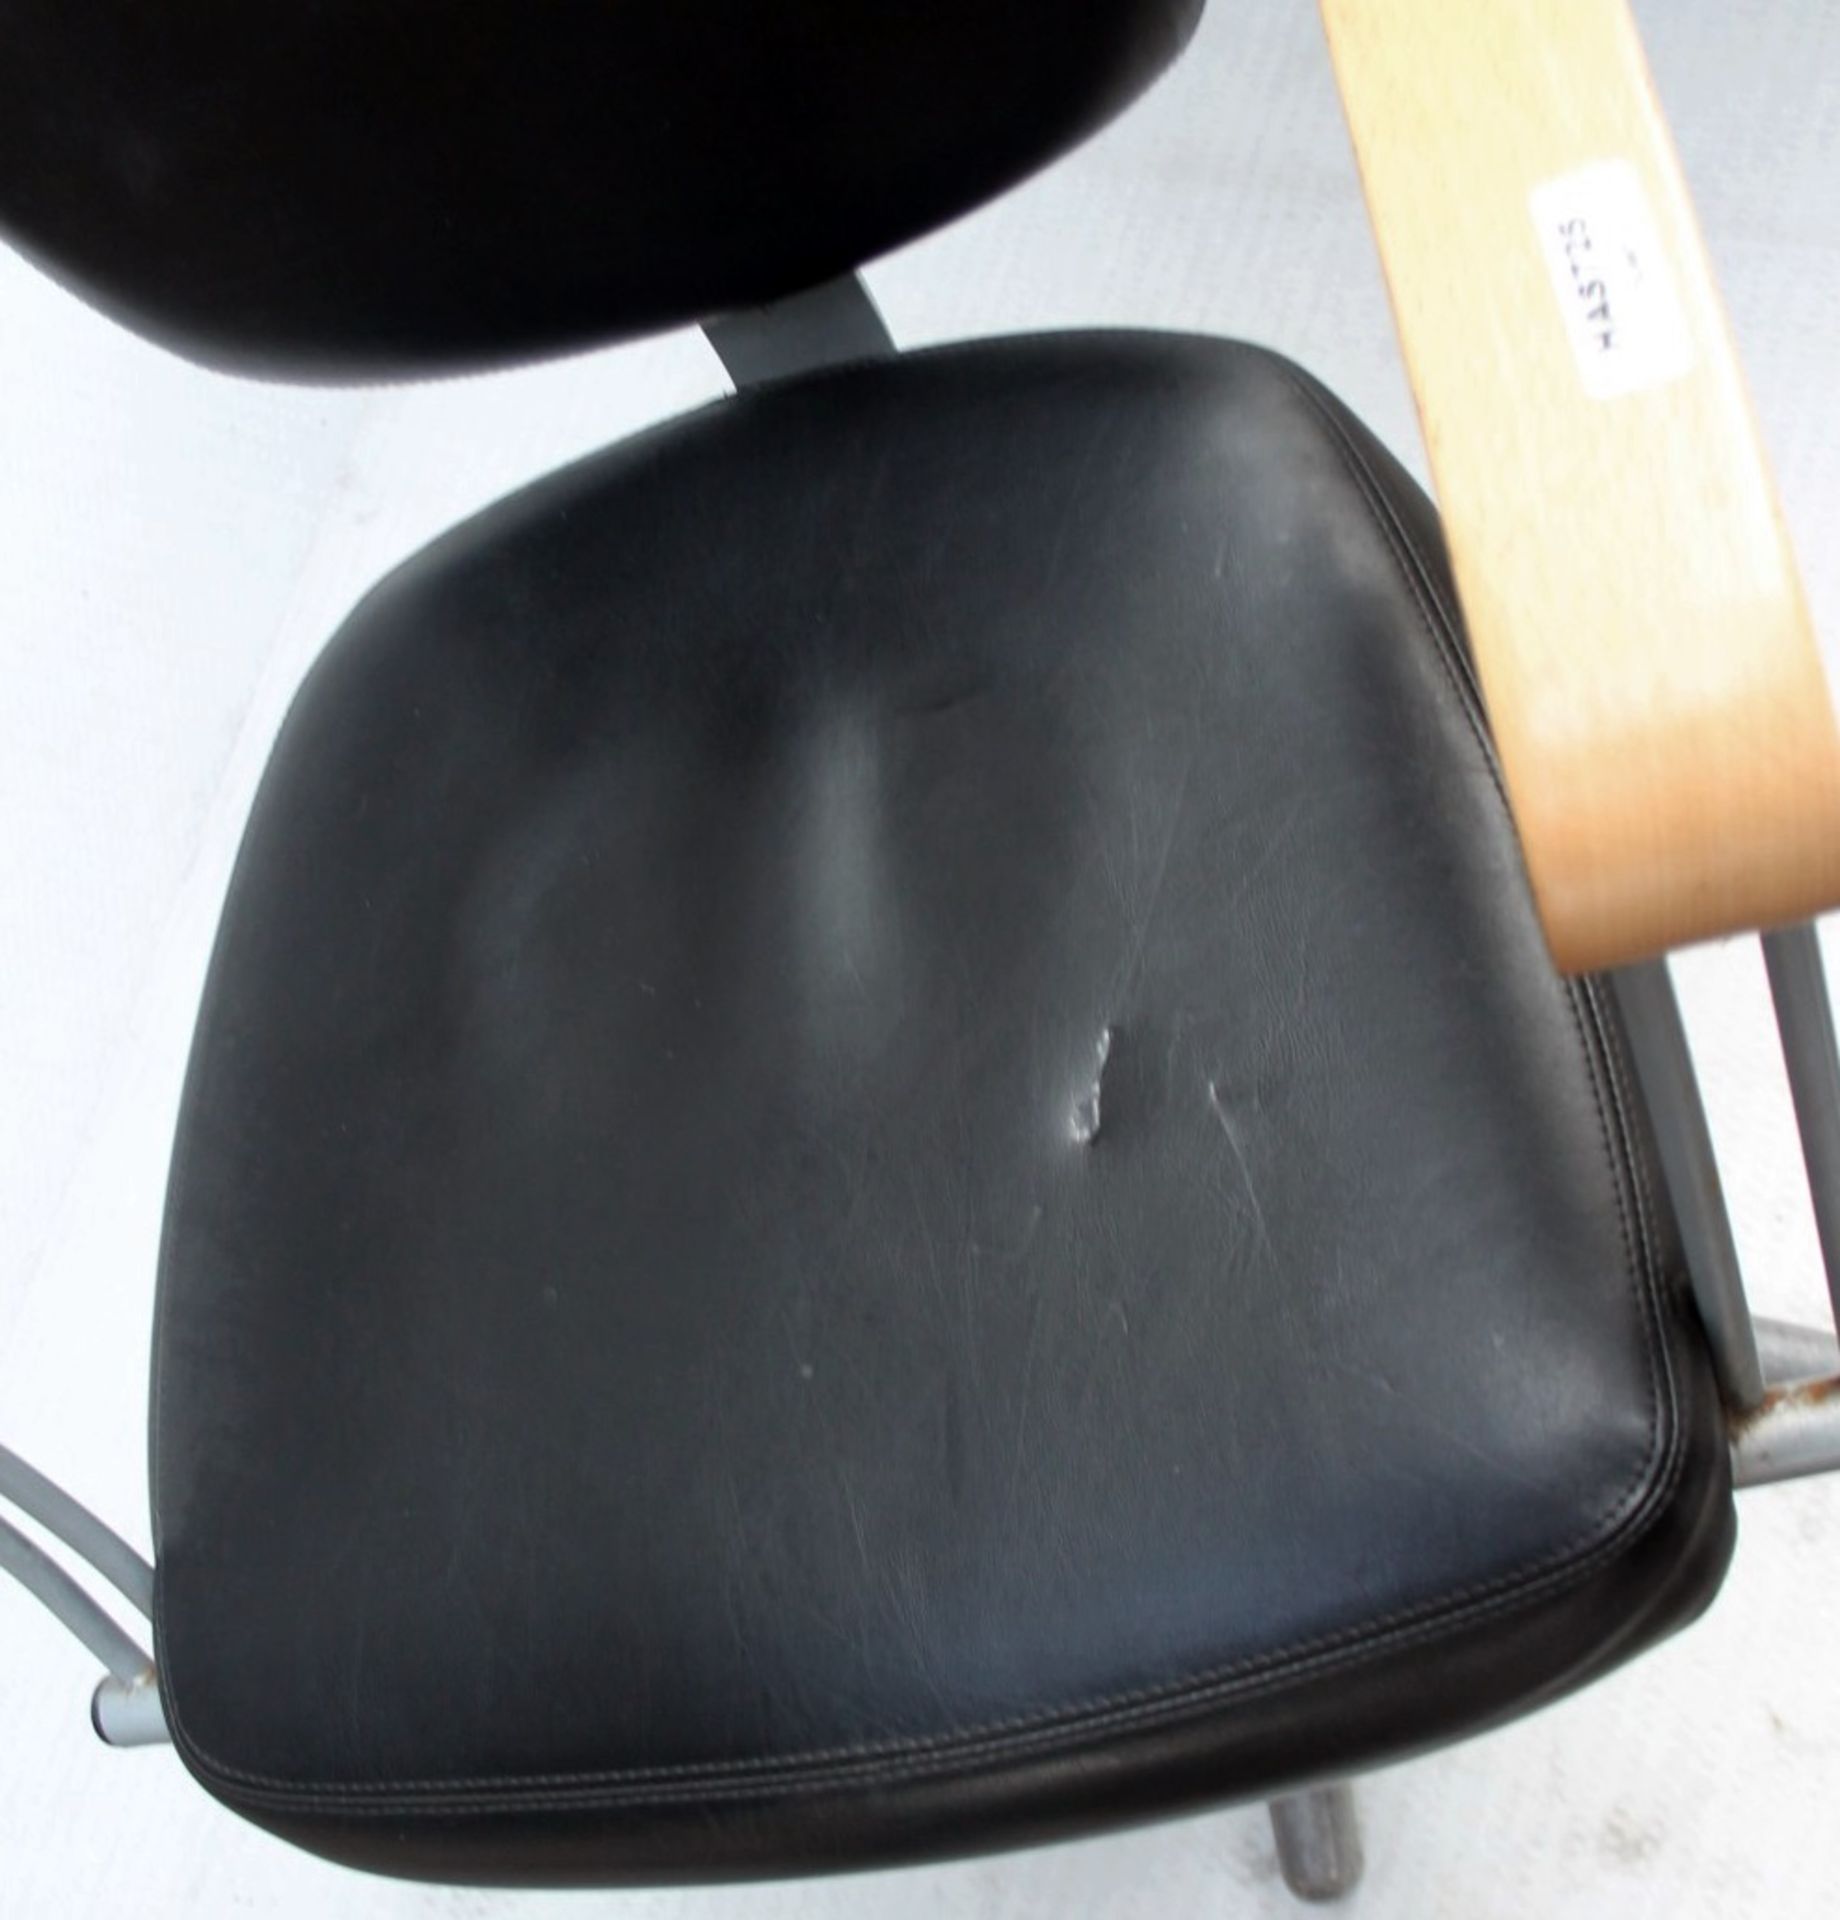 1 x Adjustable Black Hydraulic Barber Hairdressing Chair - Recently Removed From A Boutique Hair - Image 11 of 11